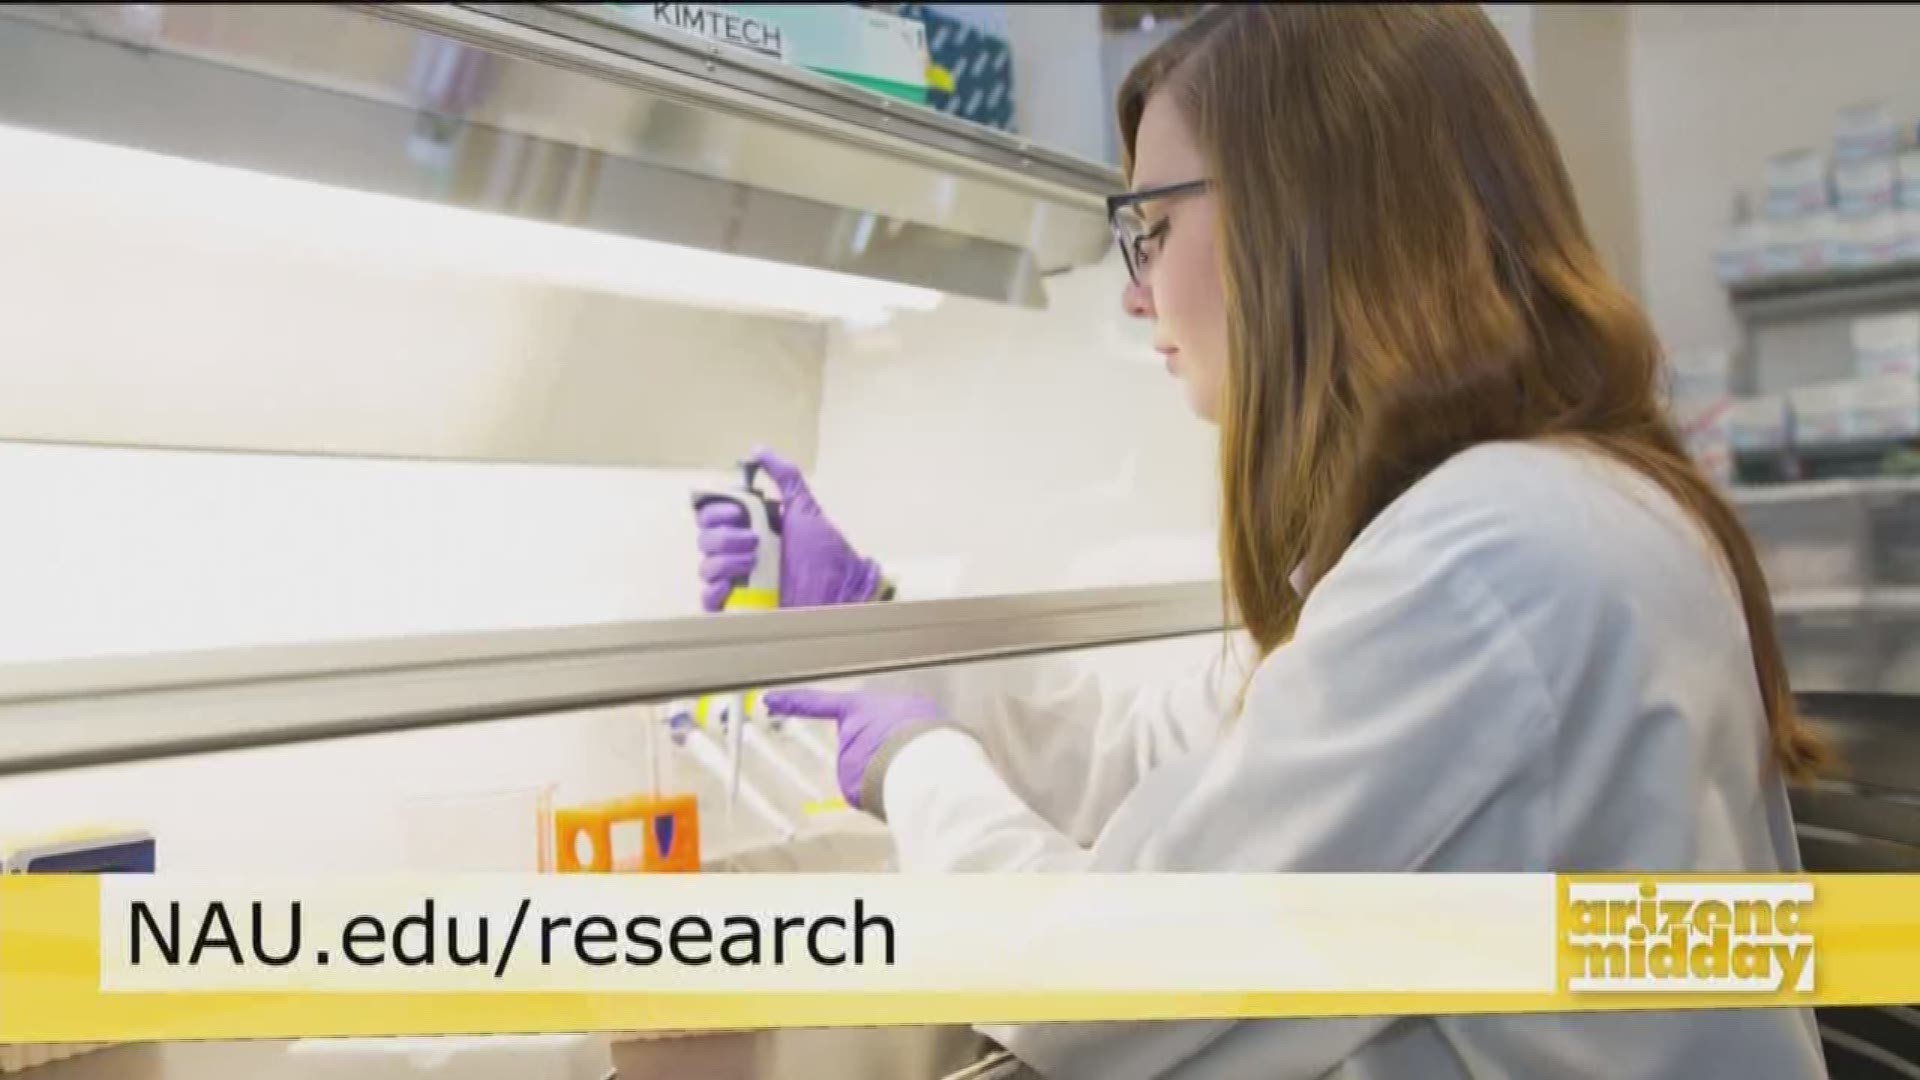 From forestry to infectious diseases NAU is at the forefront of research and innovation around the world.